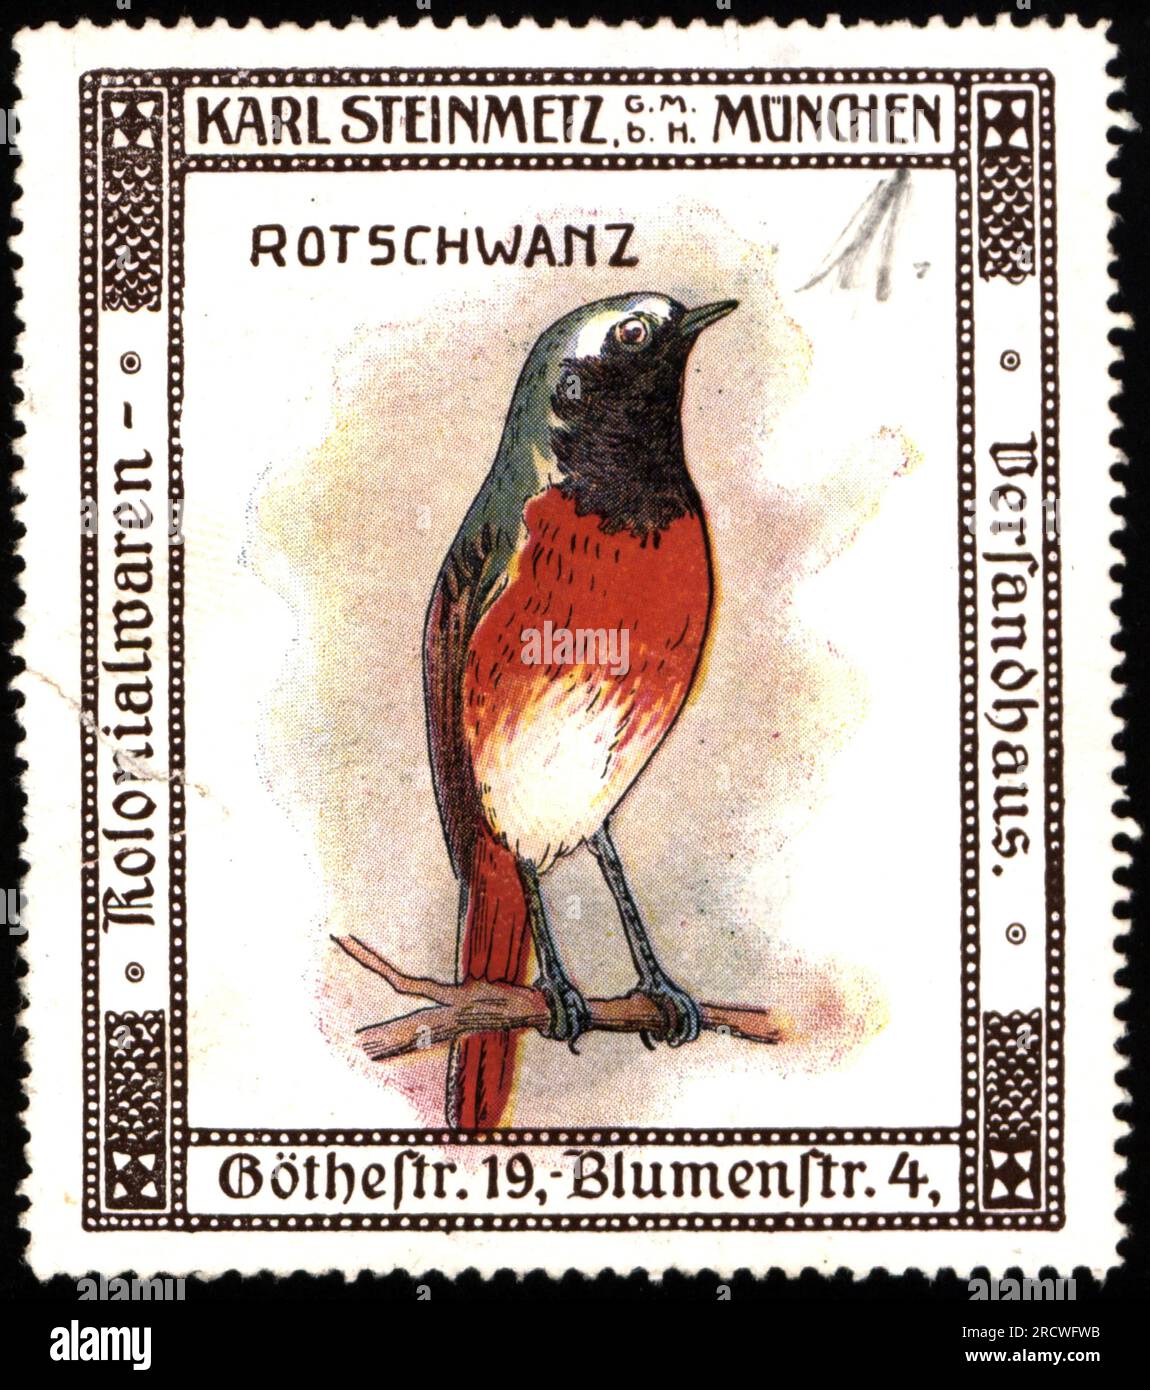 advertising, food, colonial goods catalogue company Karl Steinmetz GmbH, Munich, poster stamp, ADDITIONAL-RIGHTS-CLEARANCE-INFO-NOT-AVAILABLE Stock Photo